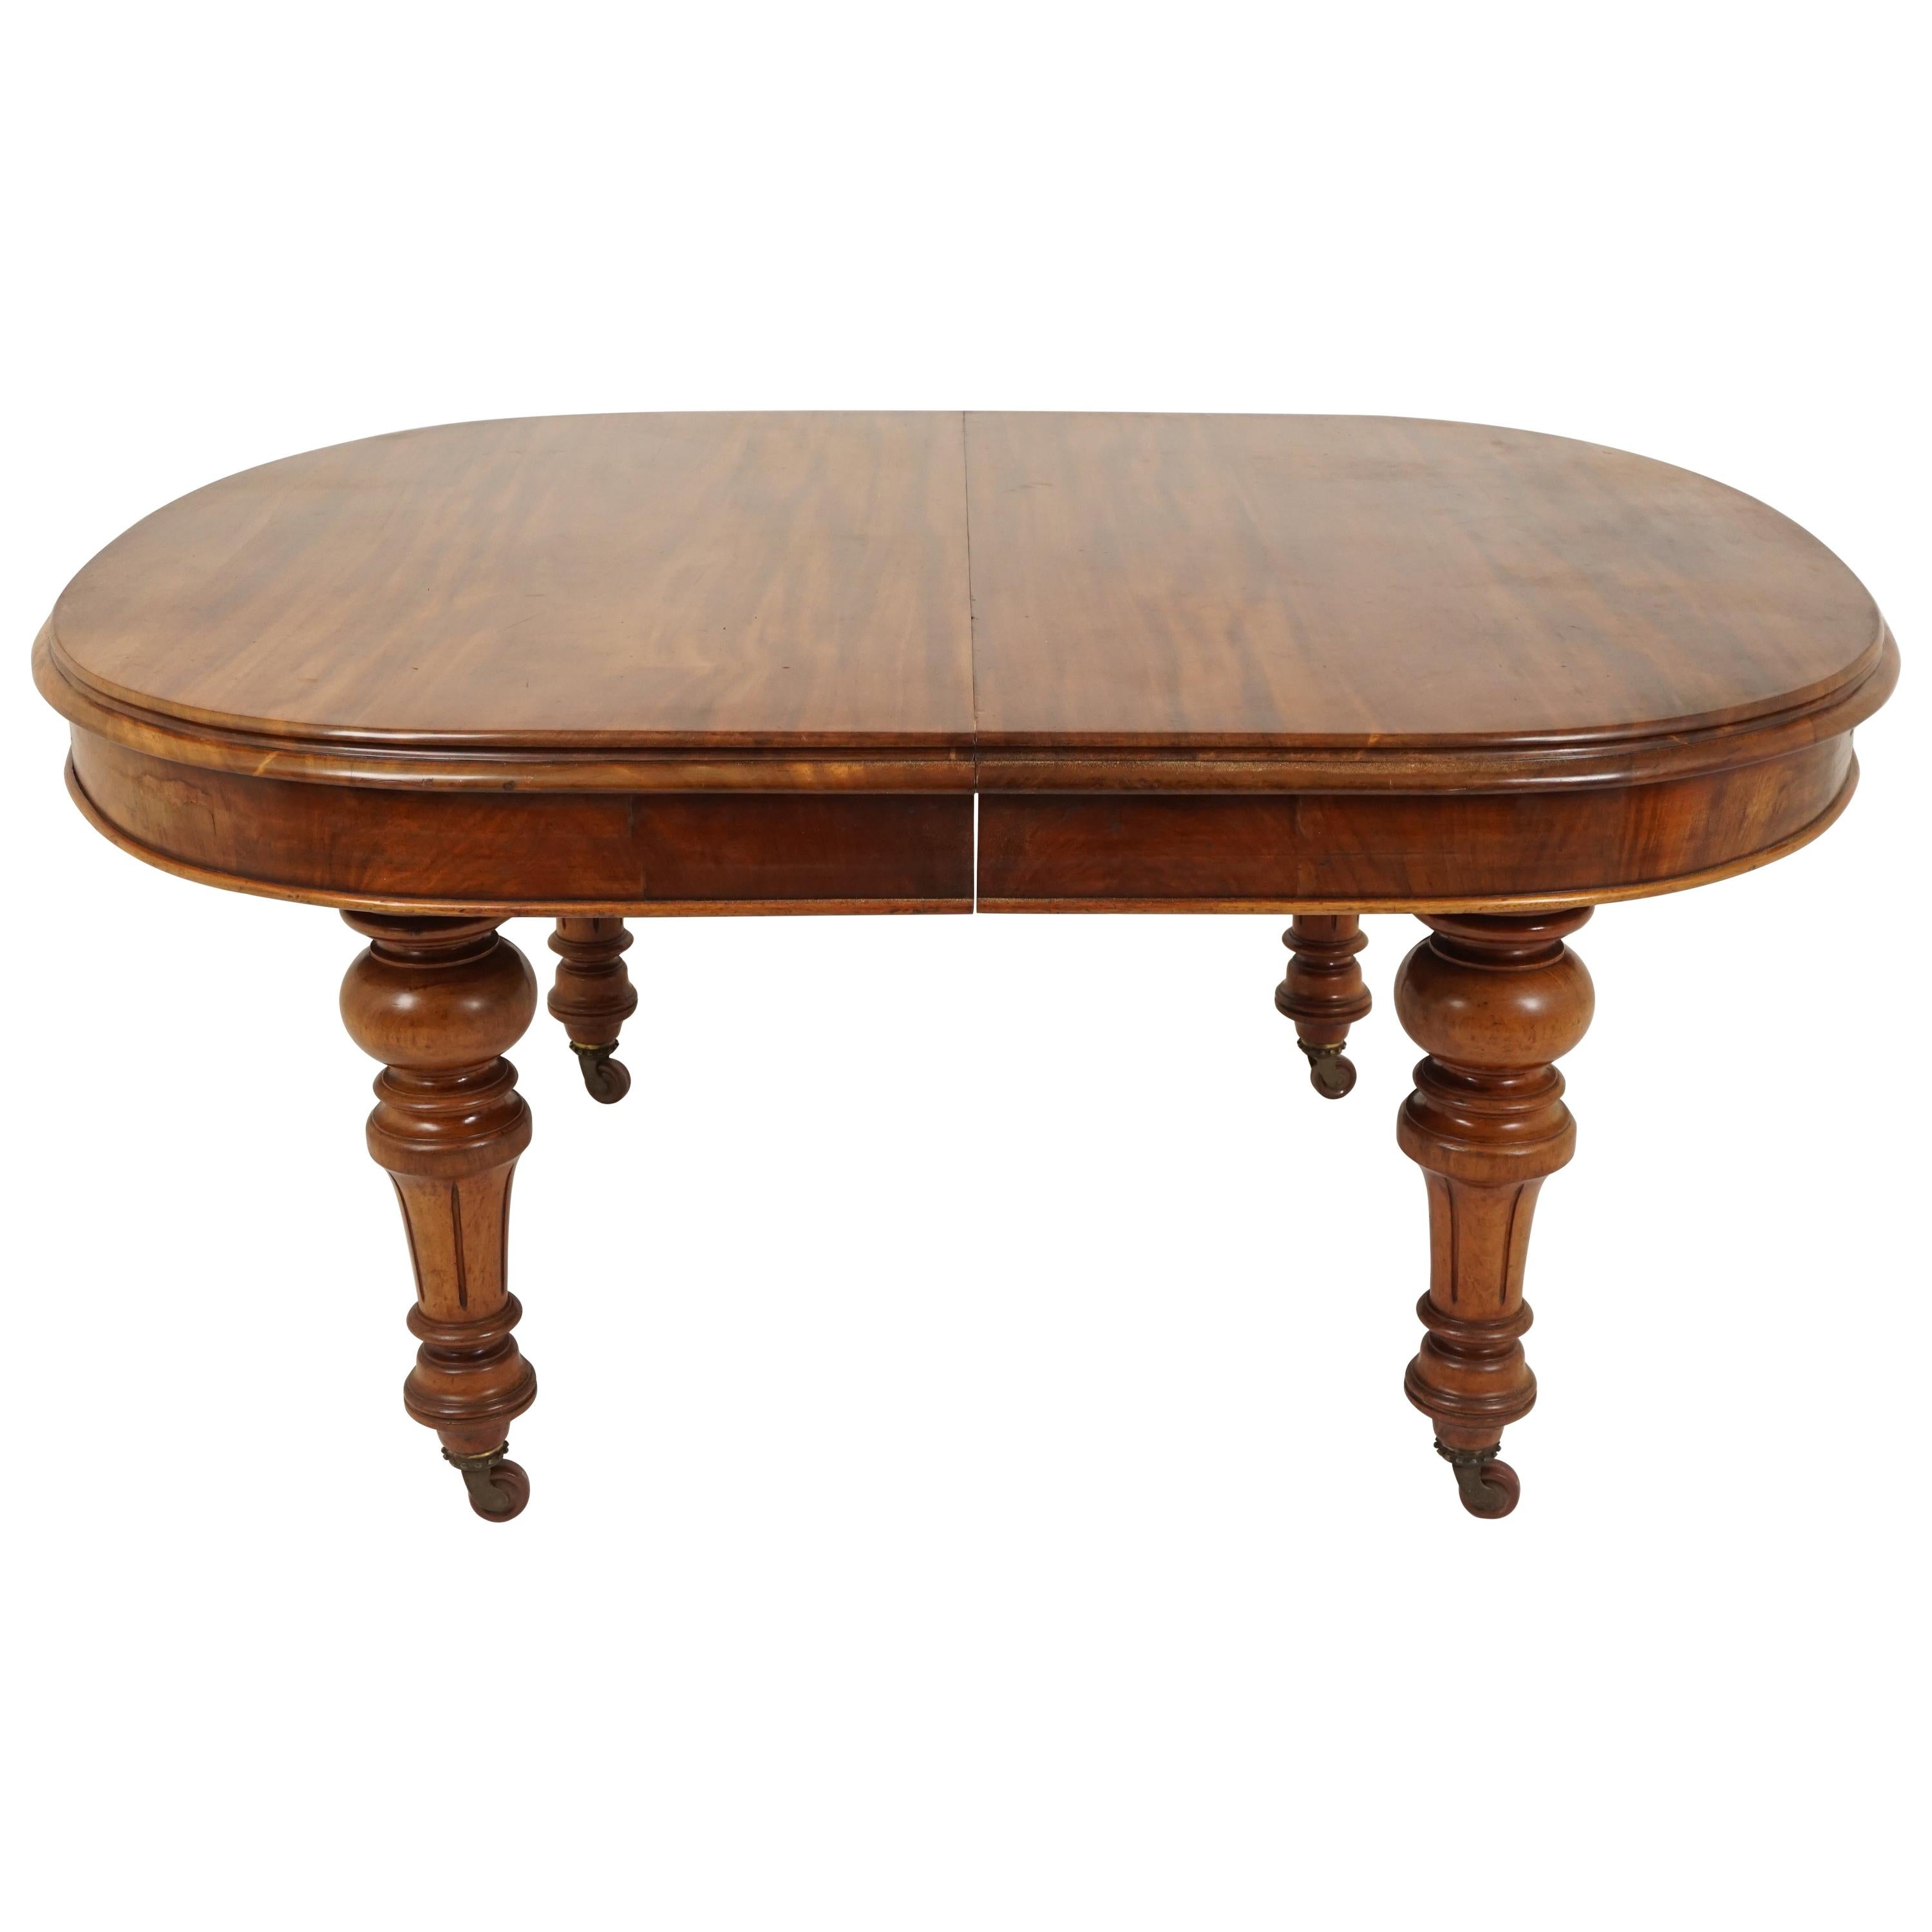 Antique Victorian Walnut Extending Dining Table with 2 Leaves, Scotland, 1880